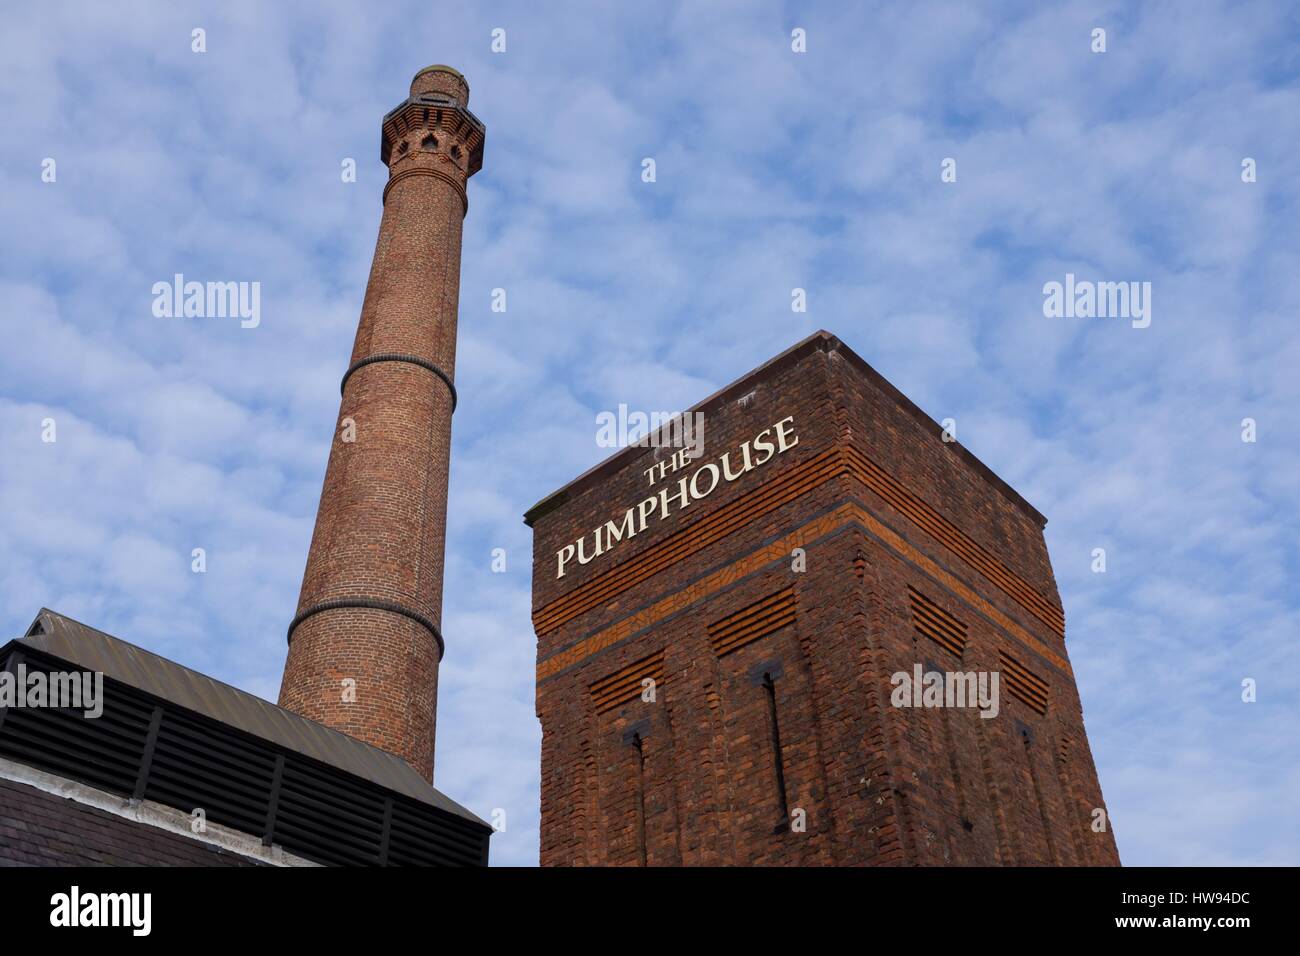 The Pumphouse building on Albert Dock in Liverpool Stock Photo